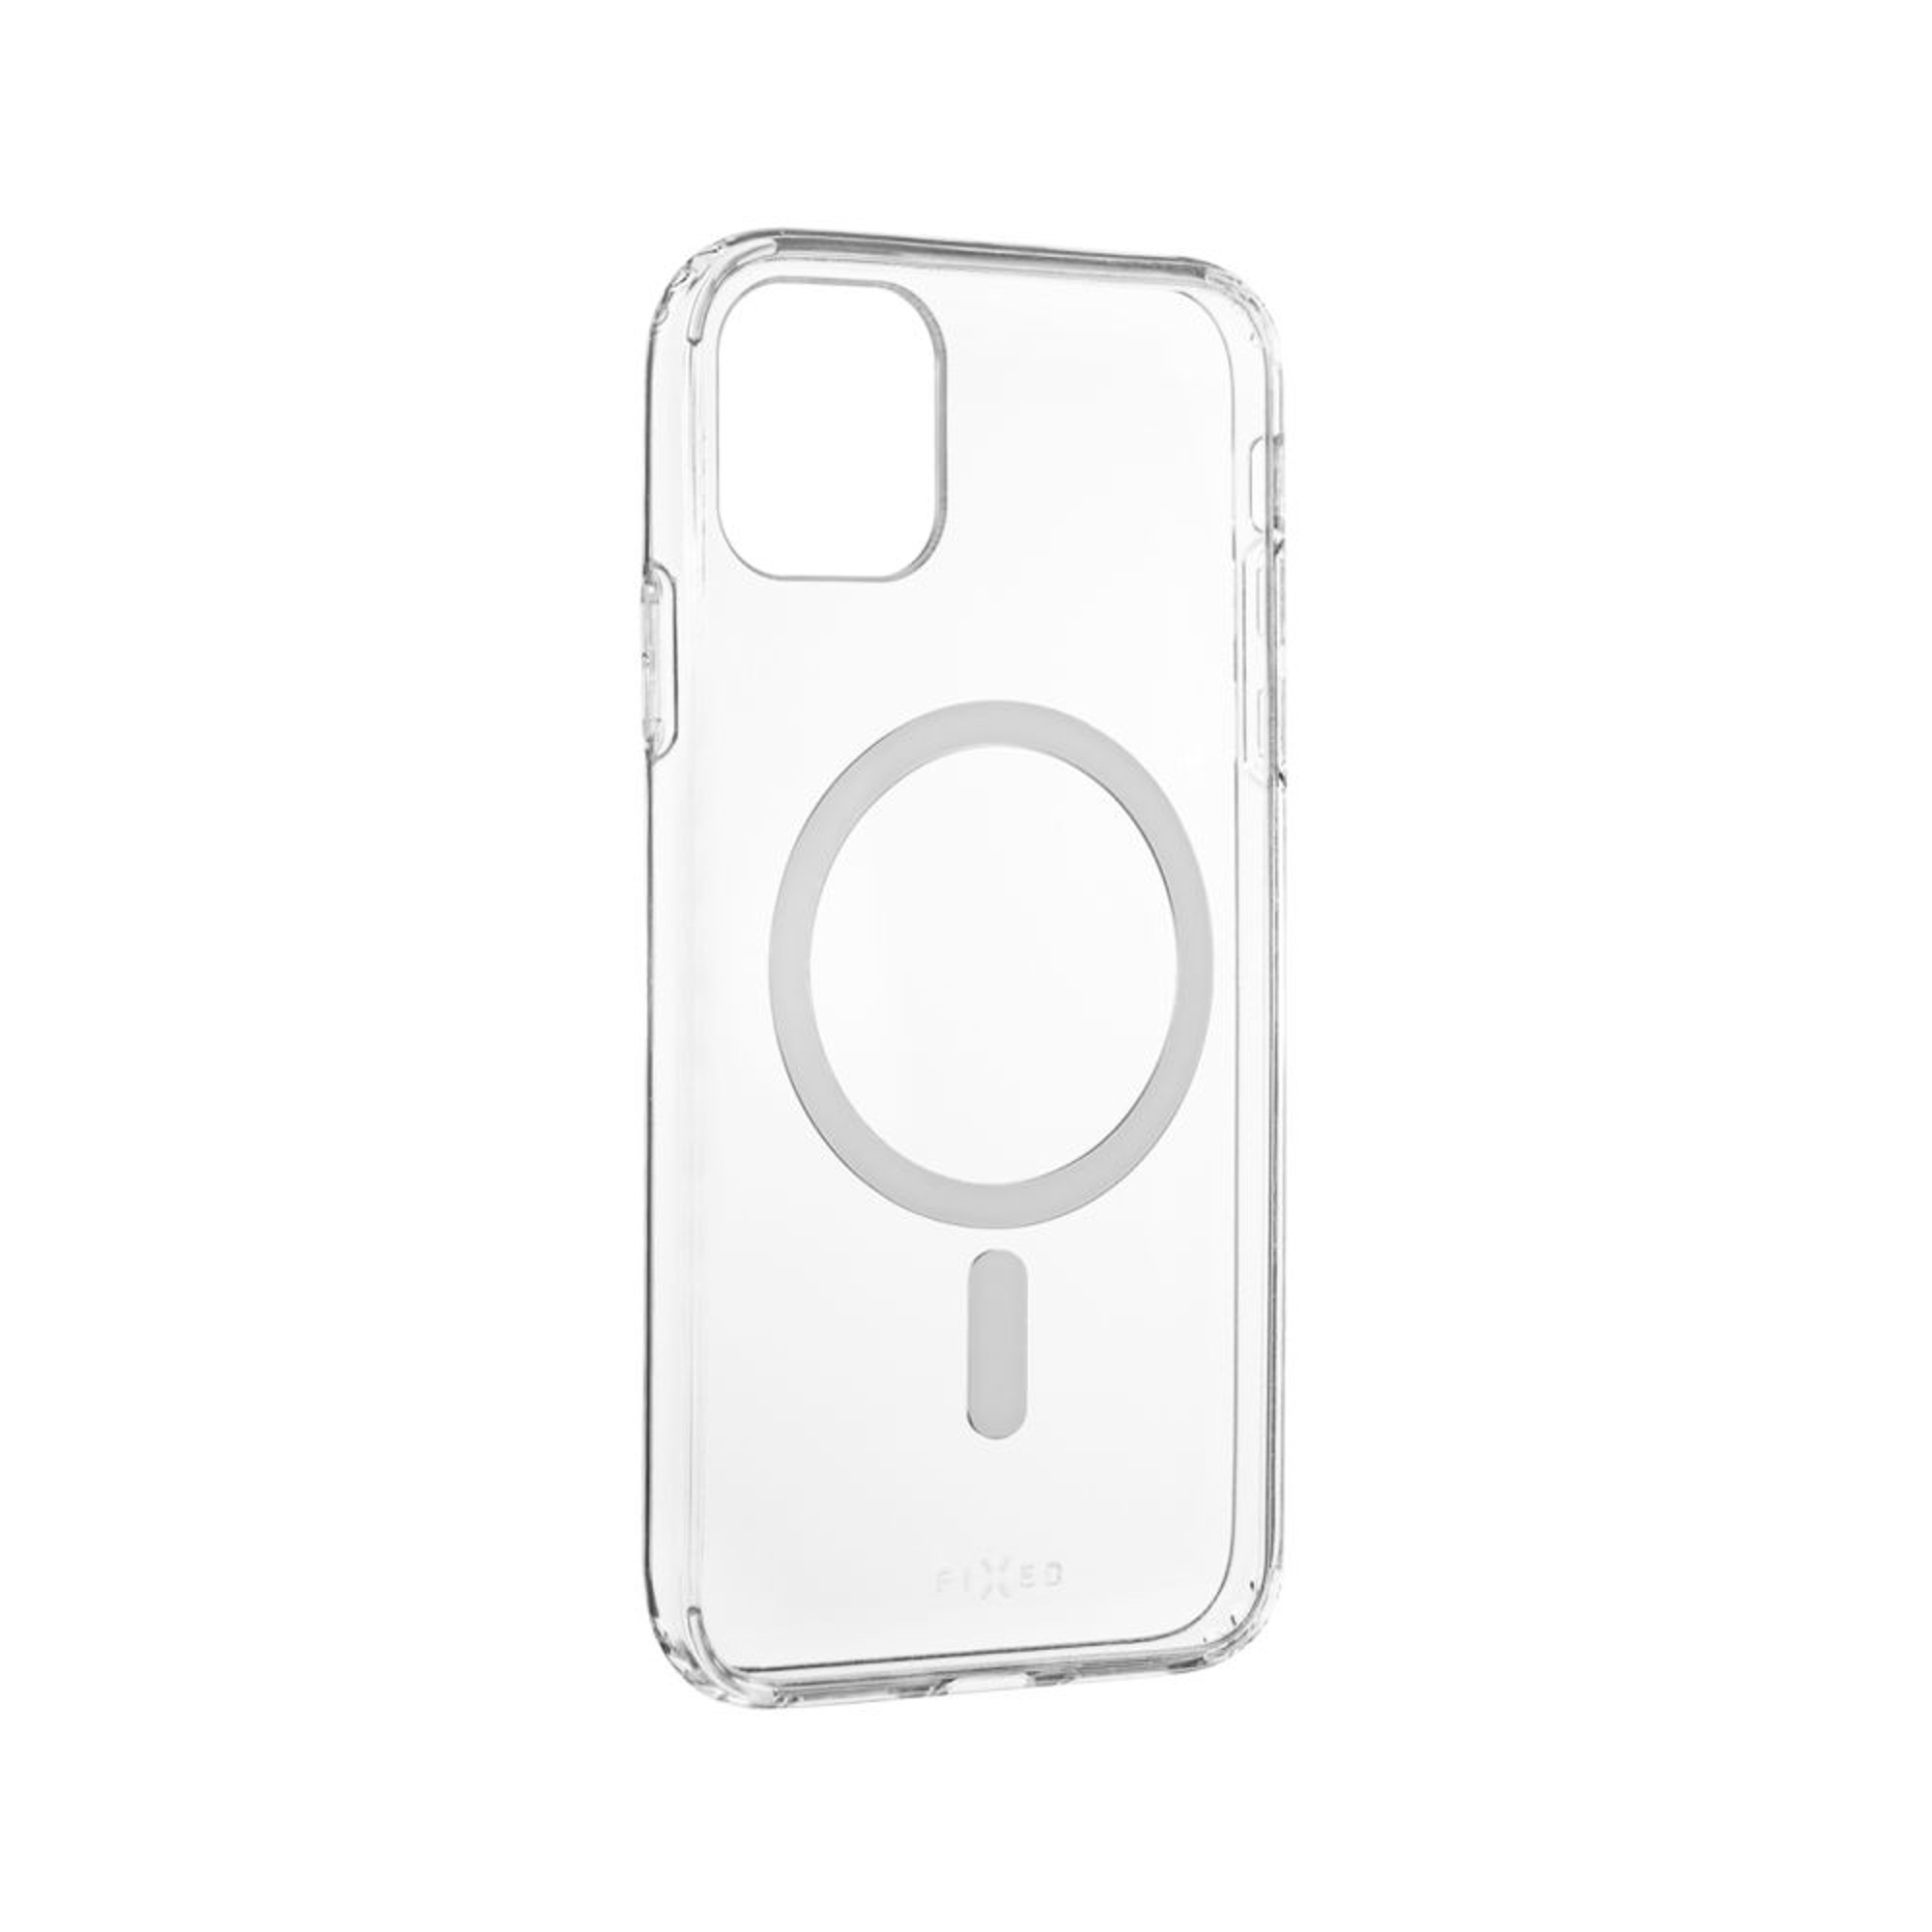 FIXPUM-428, Apple, Transparente FIXED iPhone Backcover, MagPure Hybrid-Hülle 11,